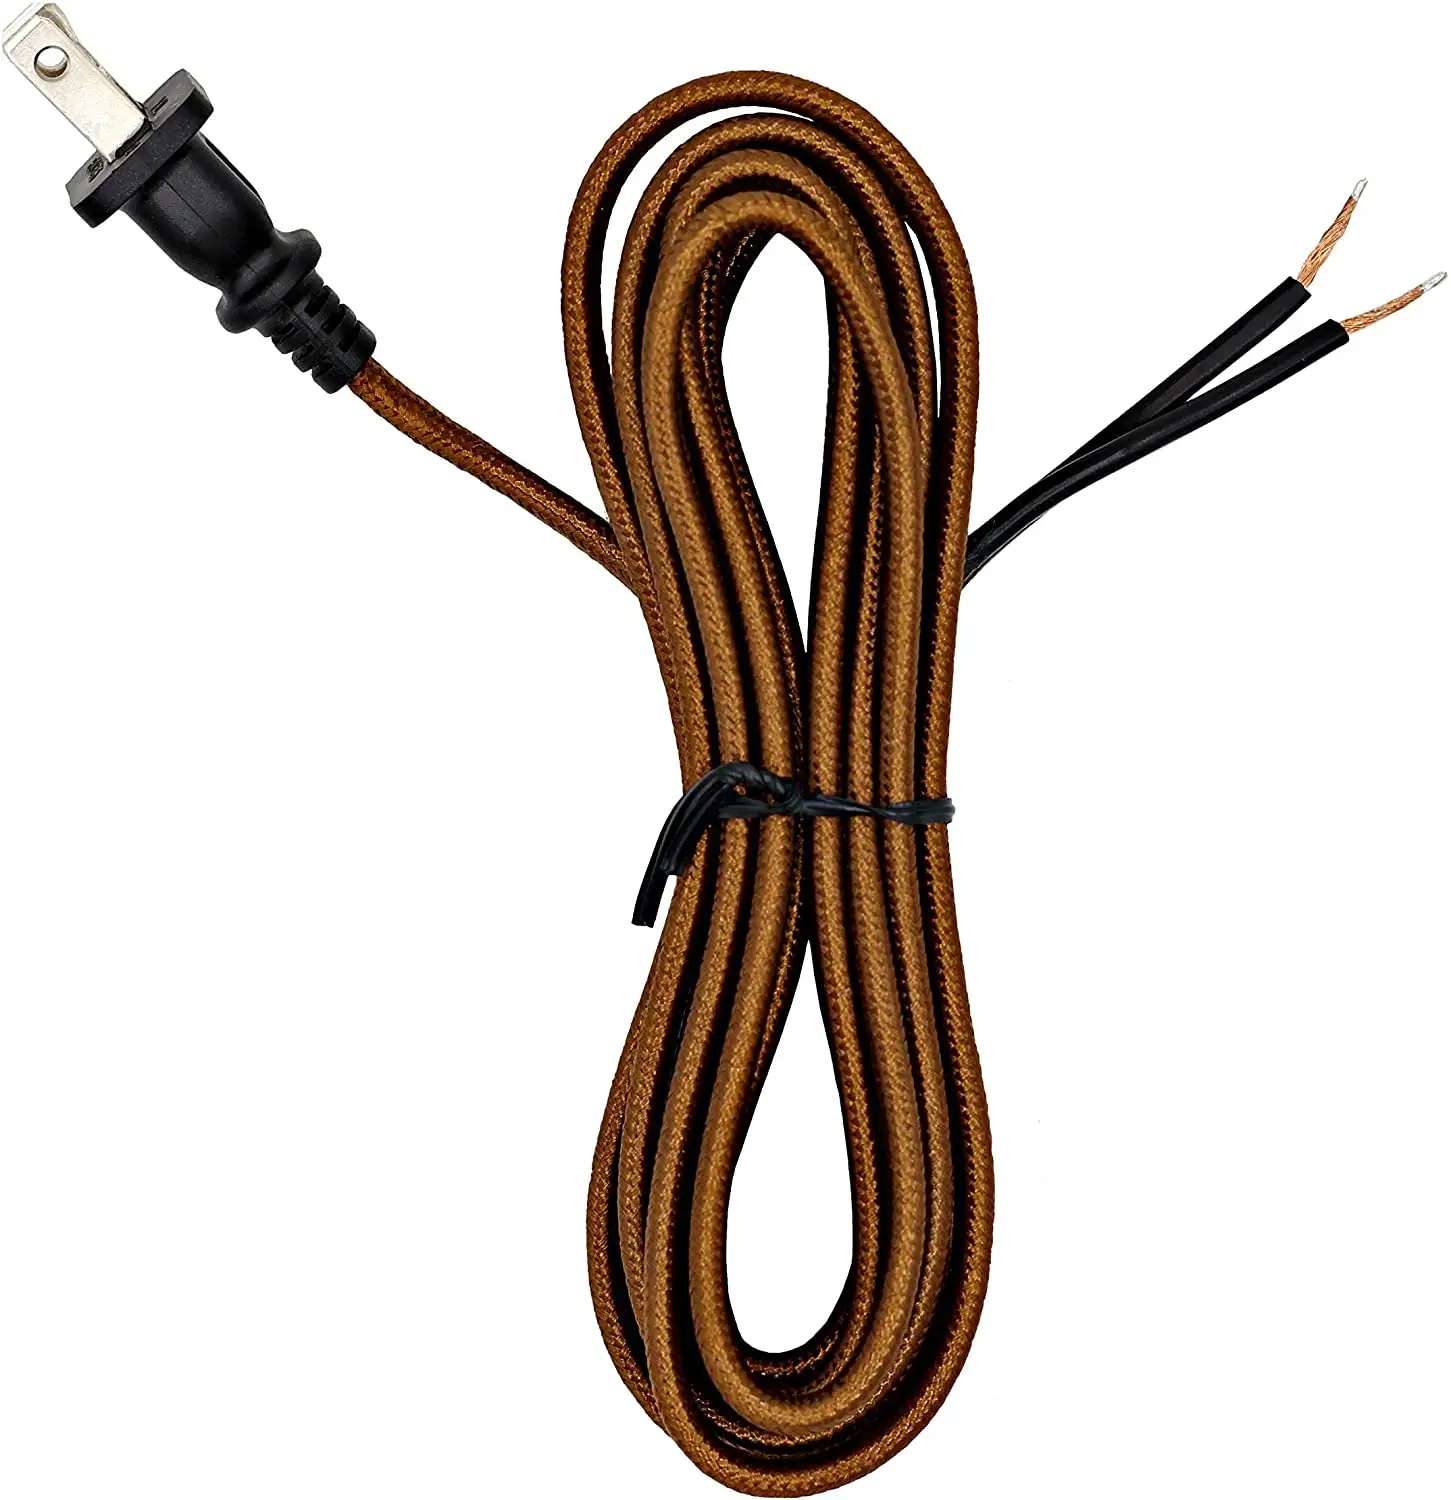 Creative Hobbies SPT-2 UL Listed Black Rayon Cloth Covered Electric Lamp Cord with End Plug